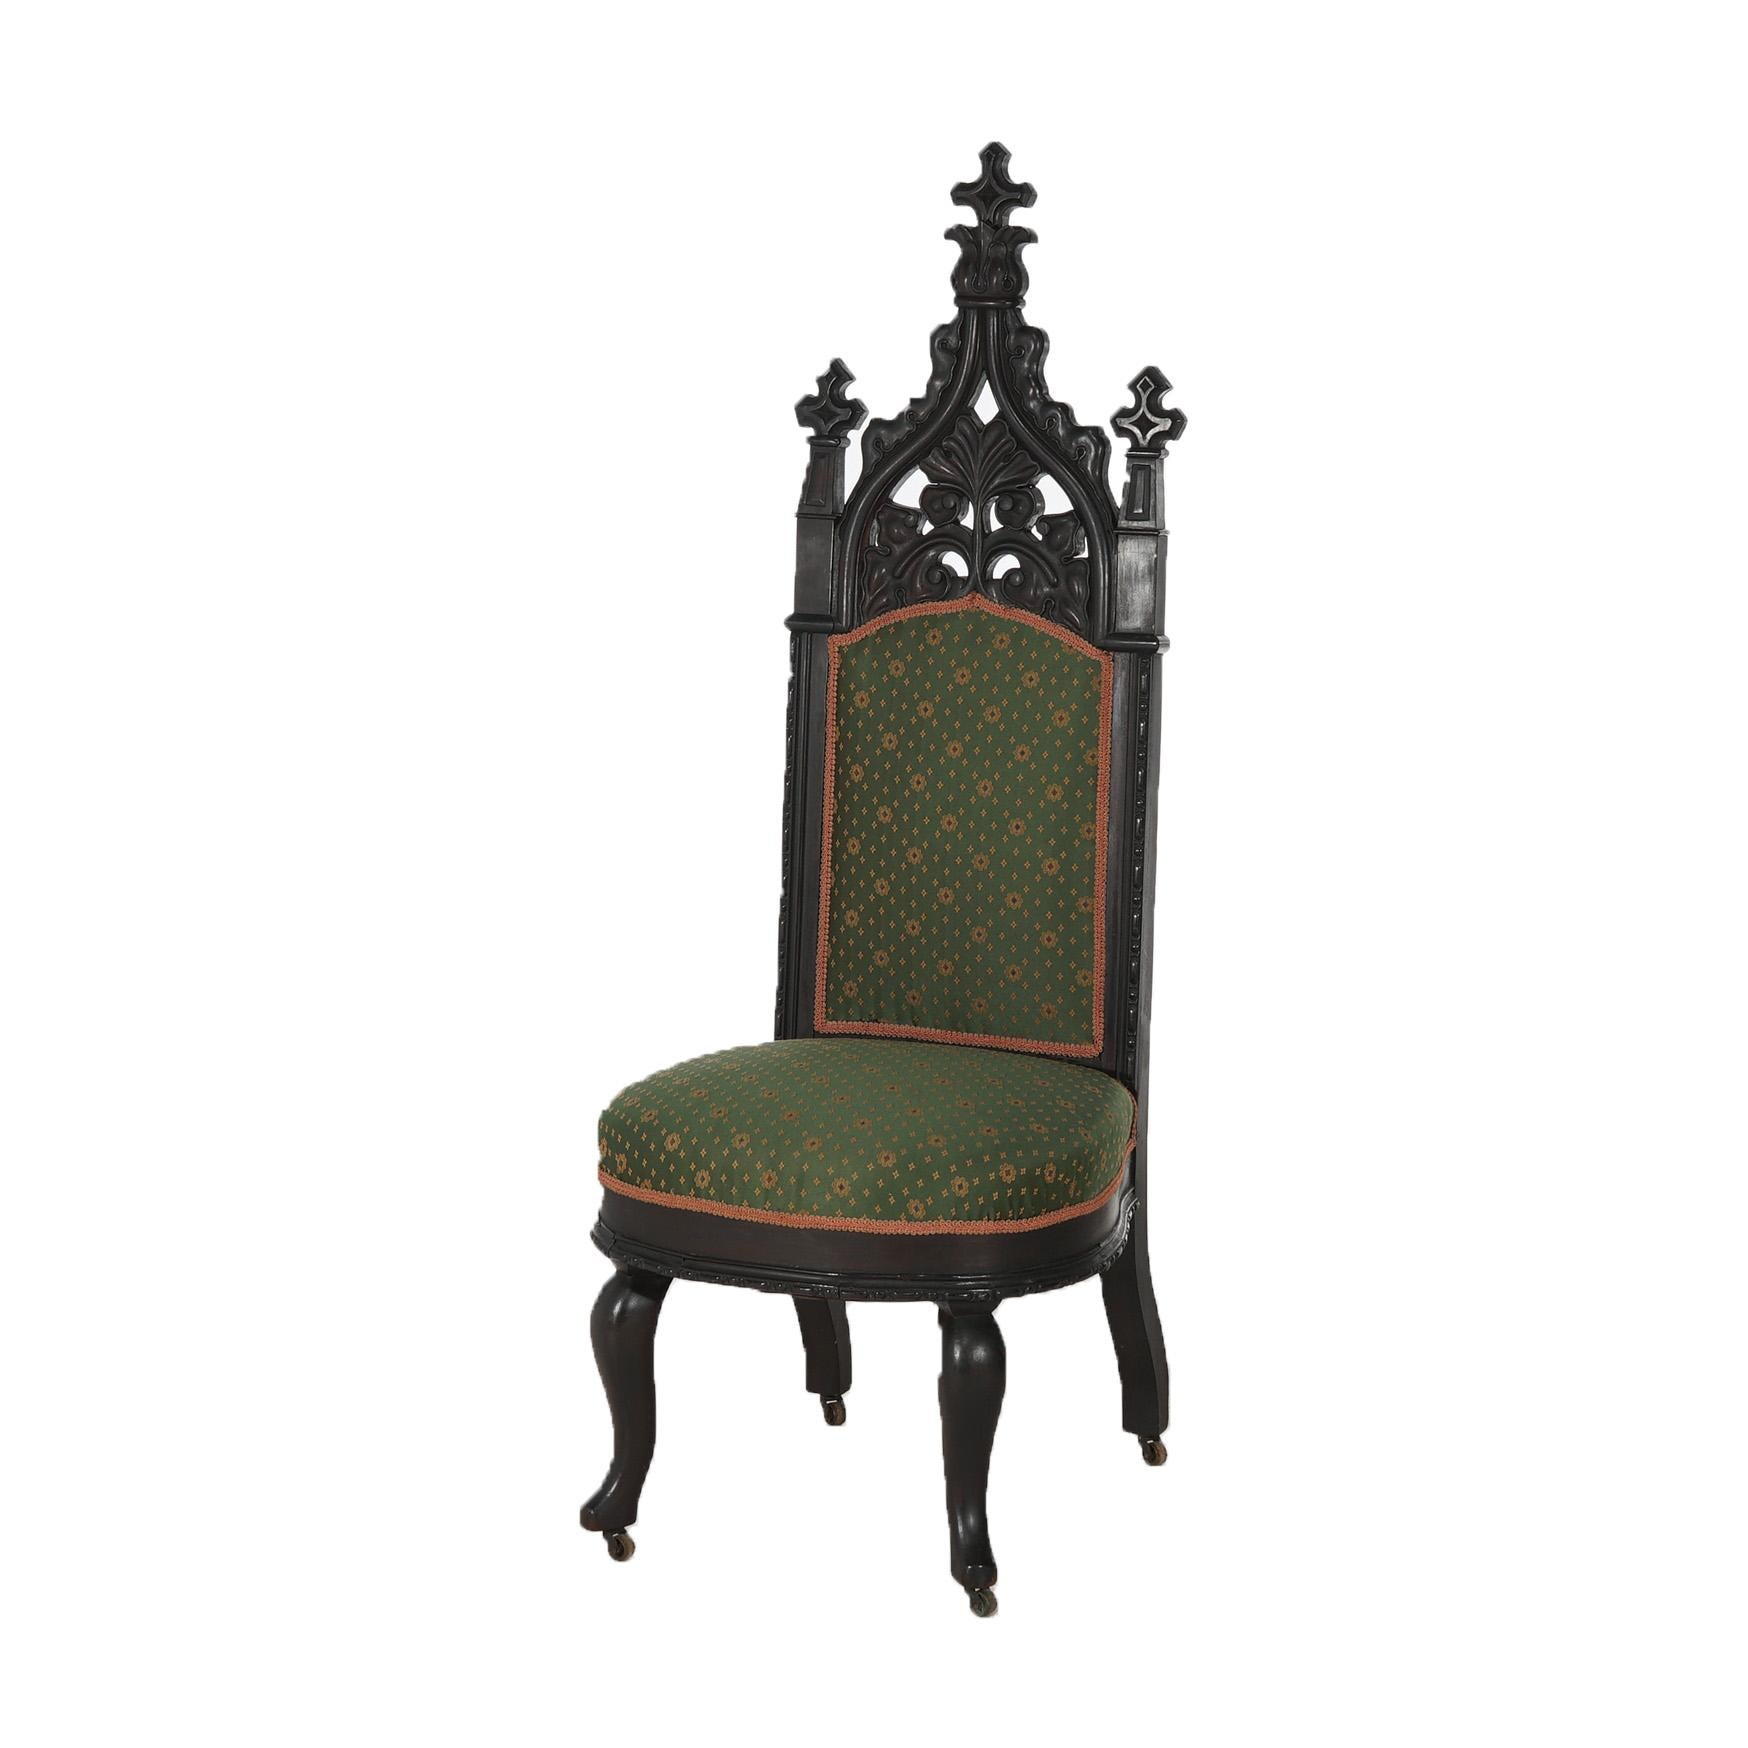 ***Ask About Reduced In-House Delivery Rates - Reliable Professional Service & Fully Insured***

Antique Gothic Revival Ebonized & Foliate Carved Walnut Upholstered Throne Chair C1860

Measures - 51.5